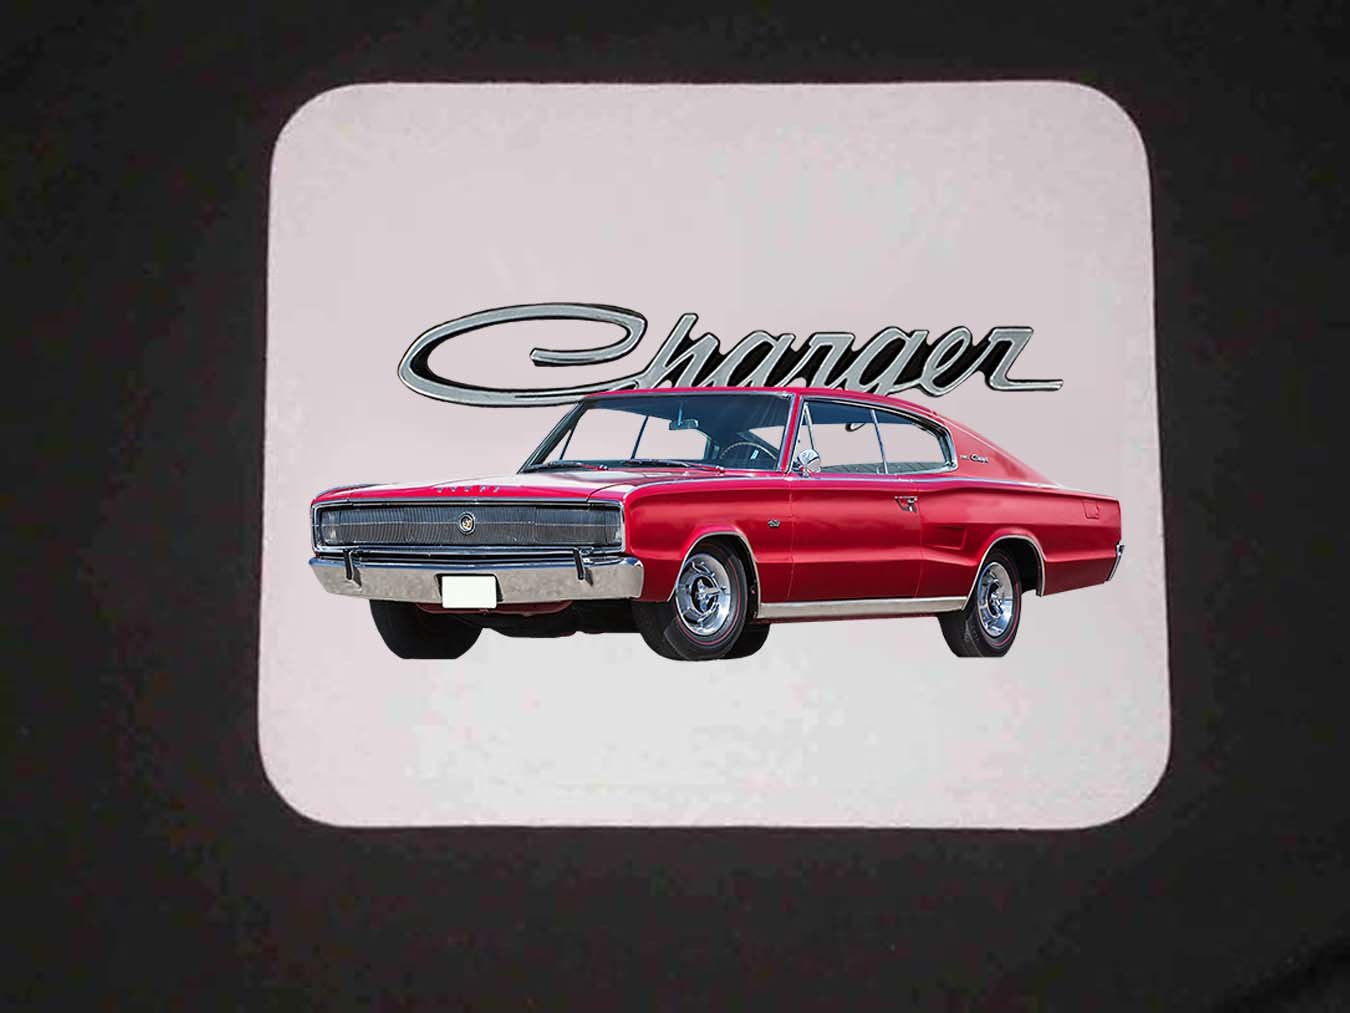 New 1966 Dodge Charger Mousepad!!